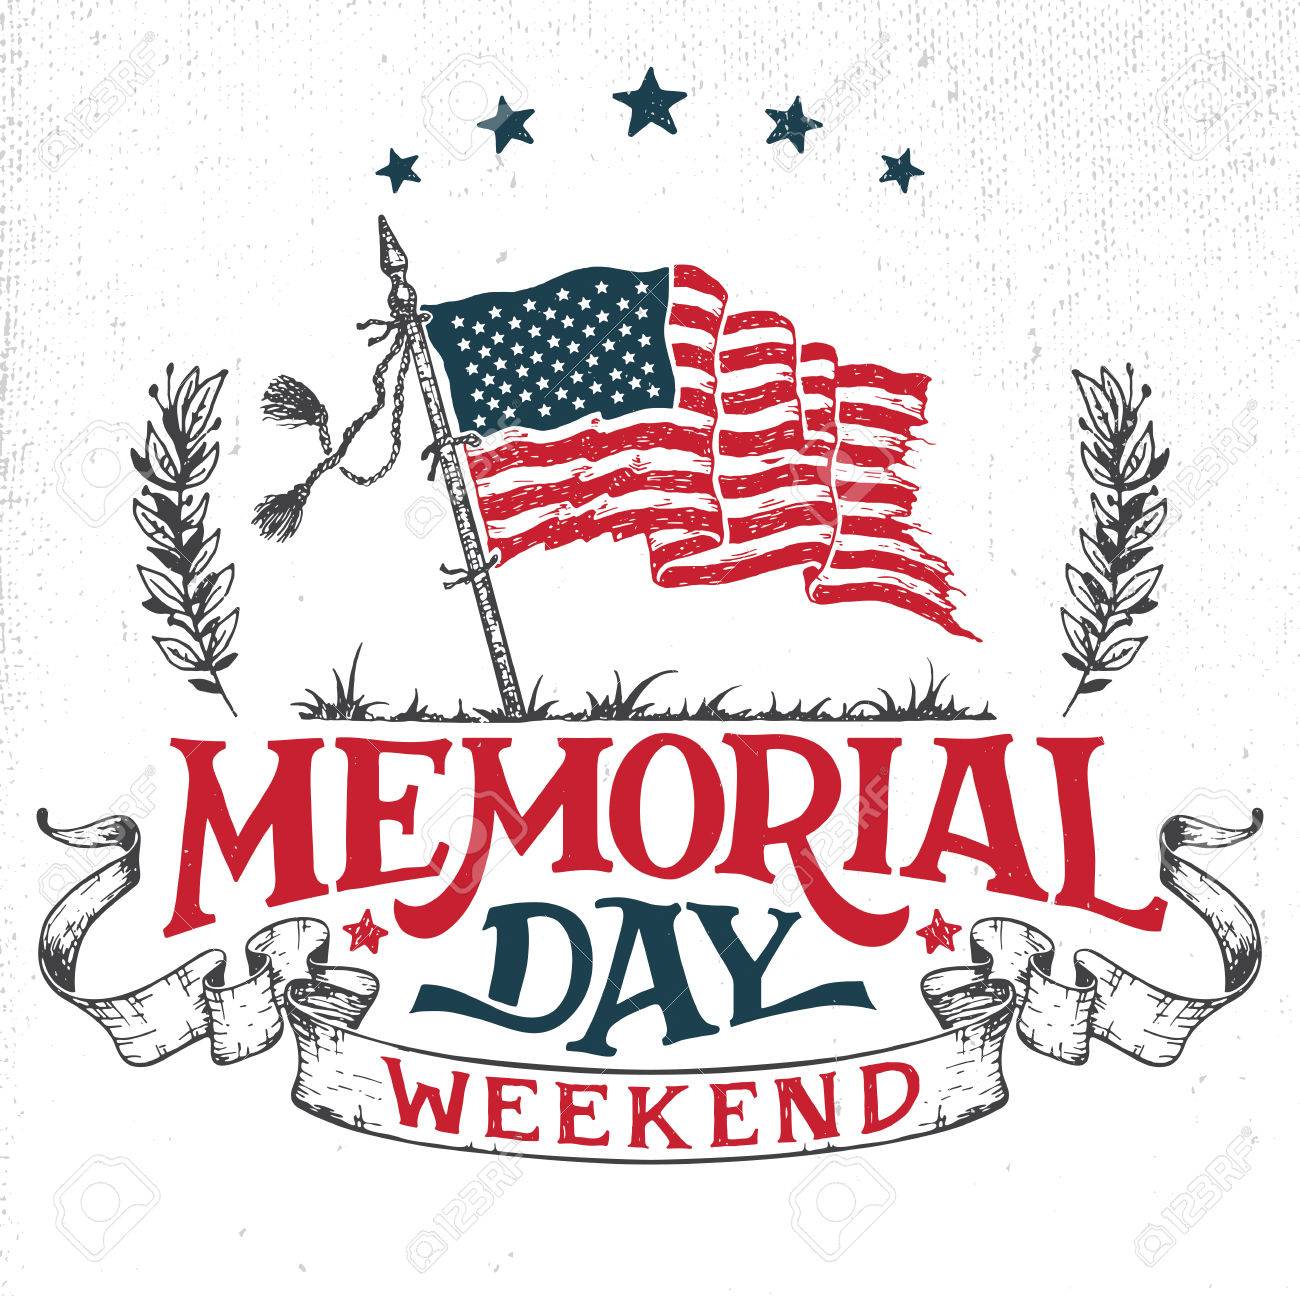 ᐅ Top 151 Memorial Day Images 21 Memorial Day Pictures Photos Hd Wallpapers Clipart Pics Free Download Unique Collection Of Wishes Messages Greetings Text Messages For All Occasion Or Festival